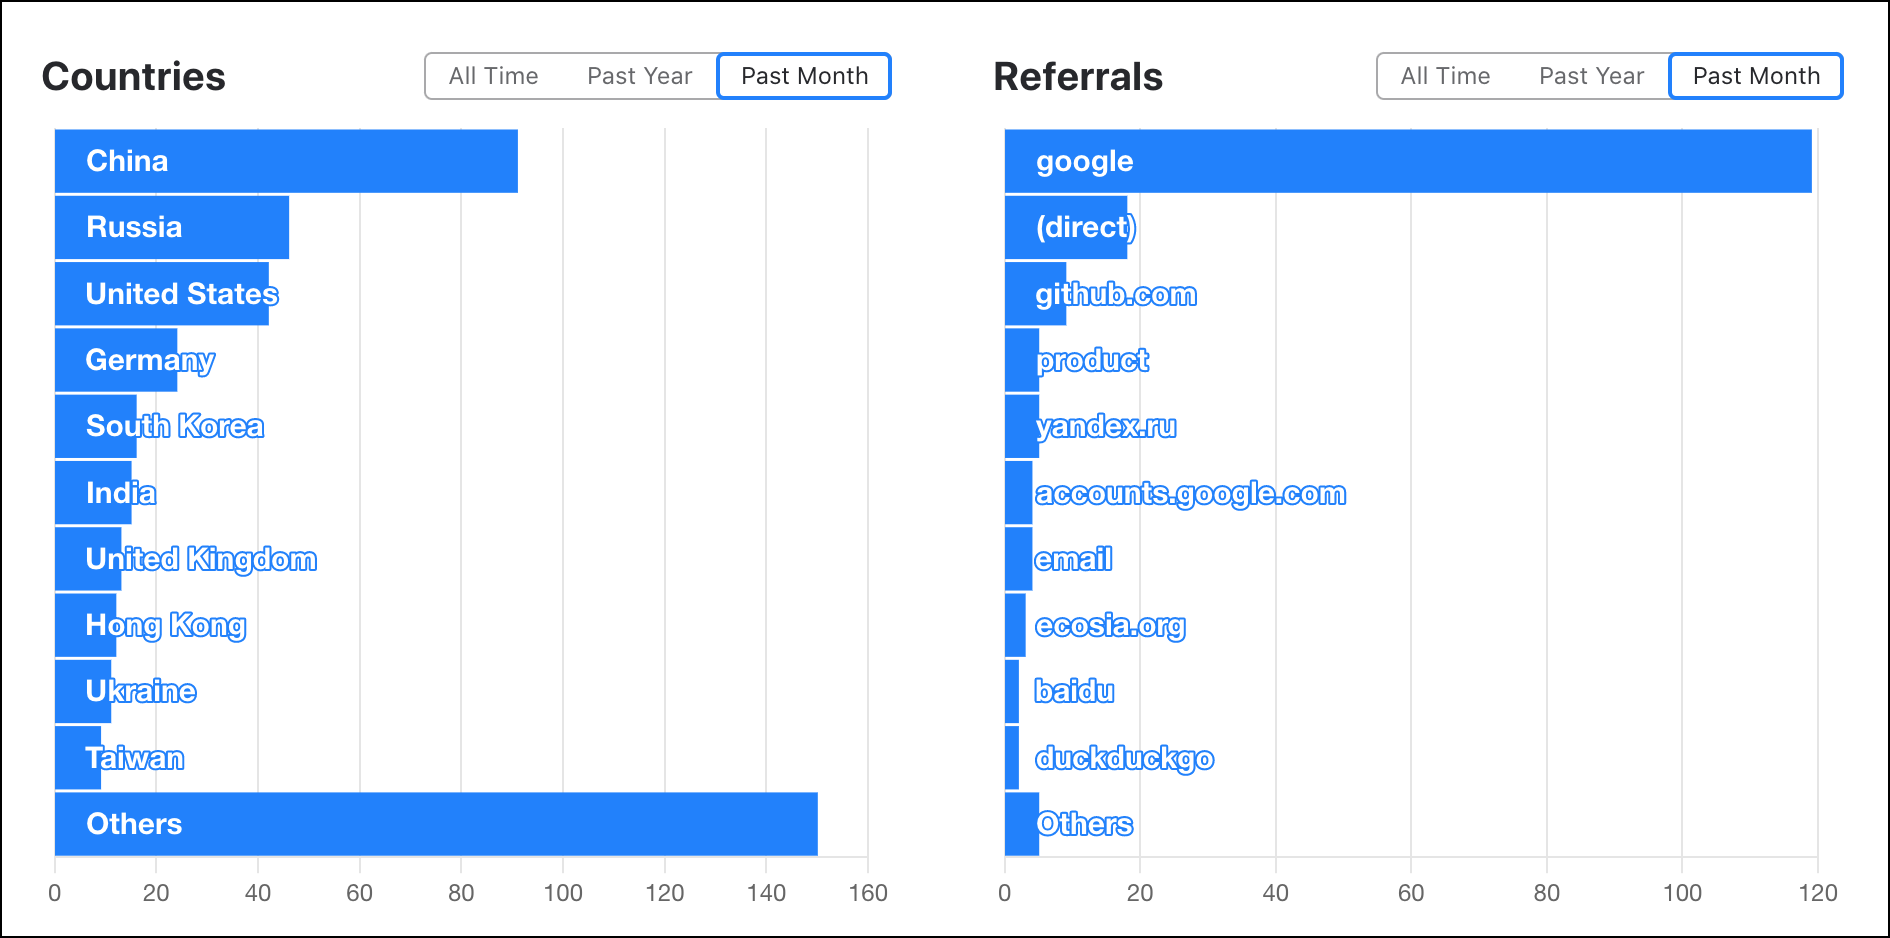 Countries and Referrals